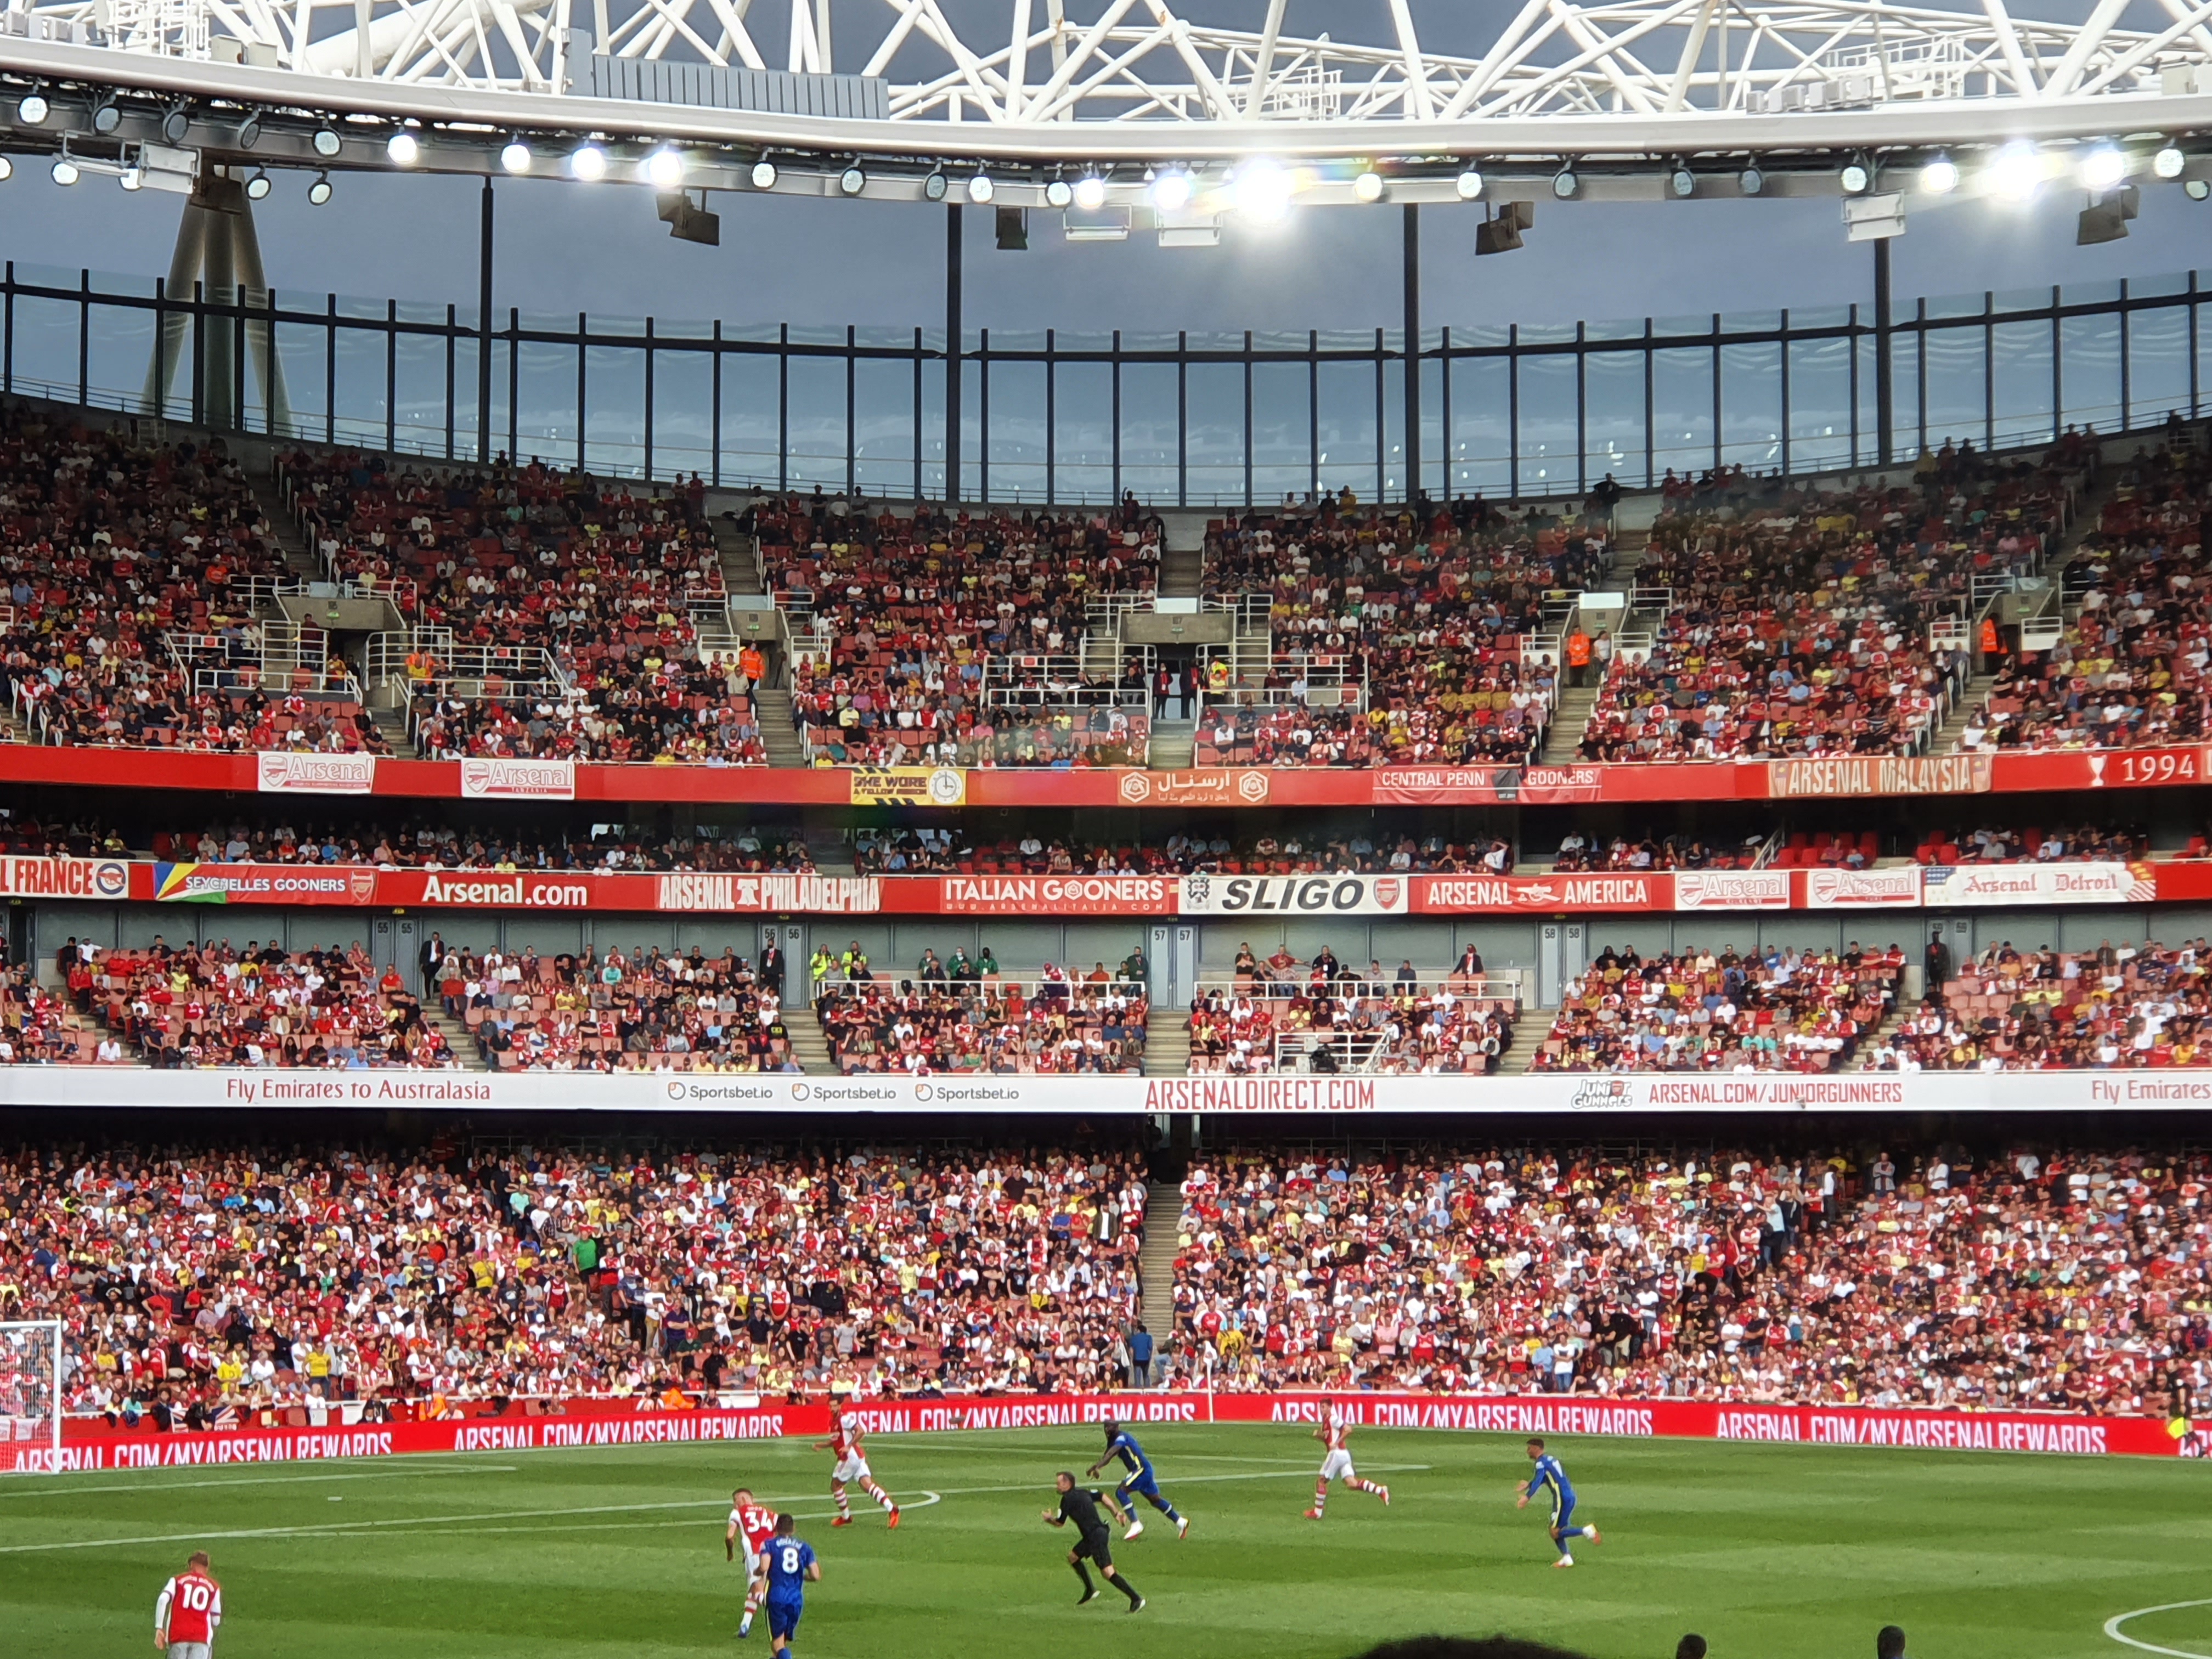 AST 'disappointed' in Arsenal rejecting call for season ticket price freeze 